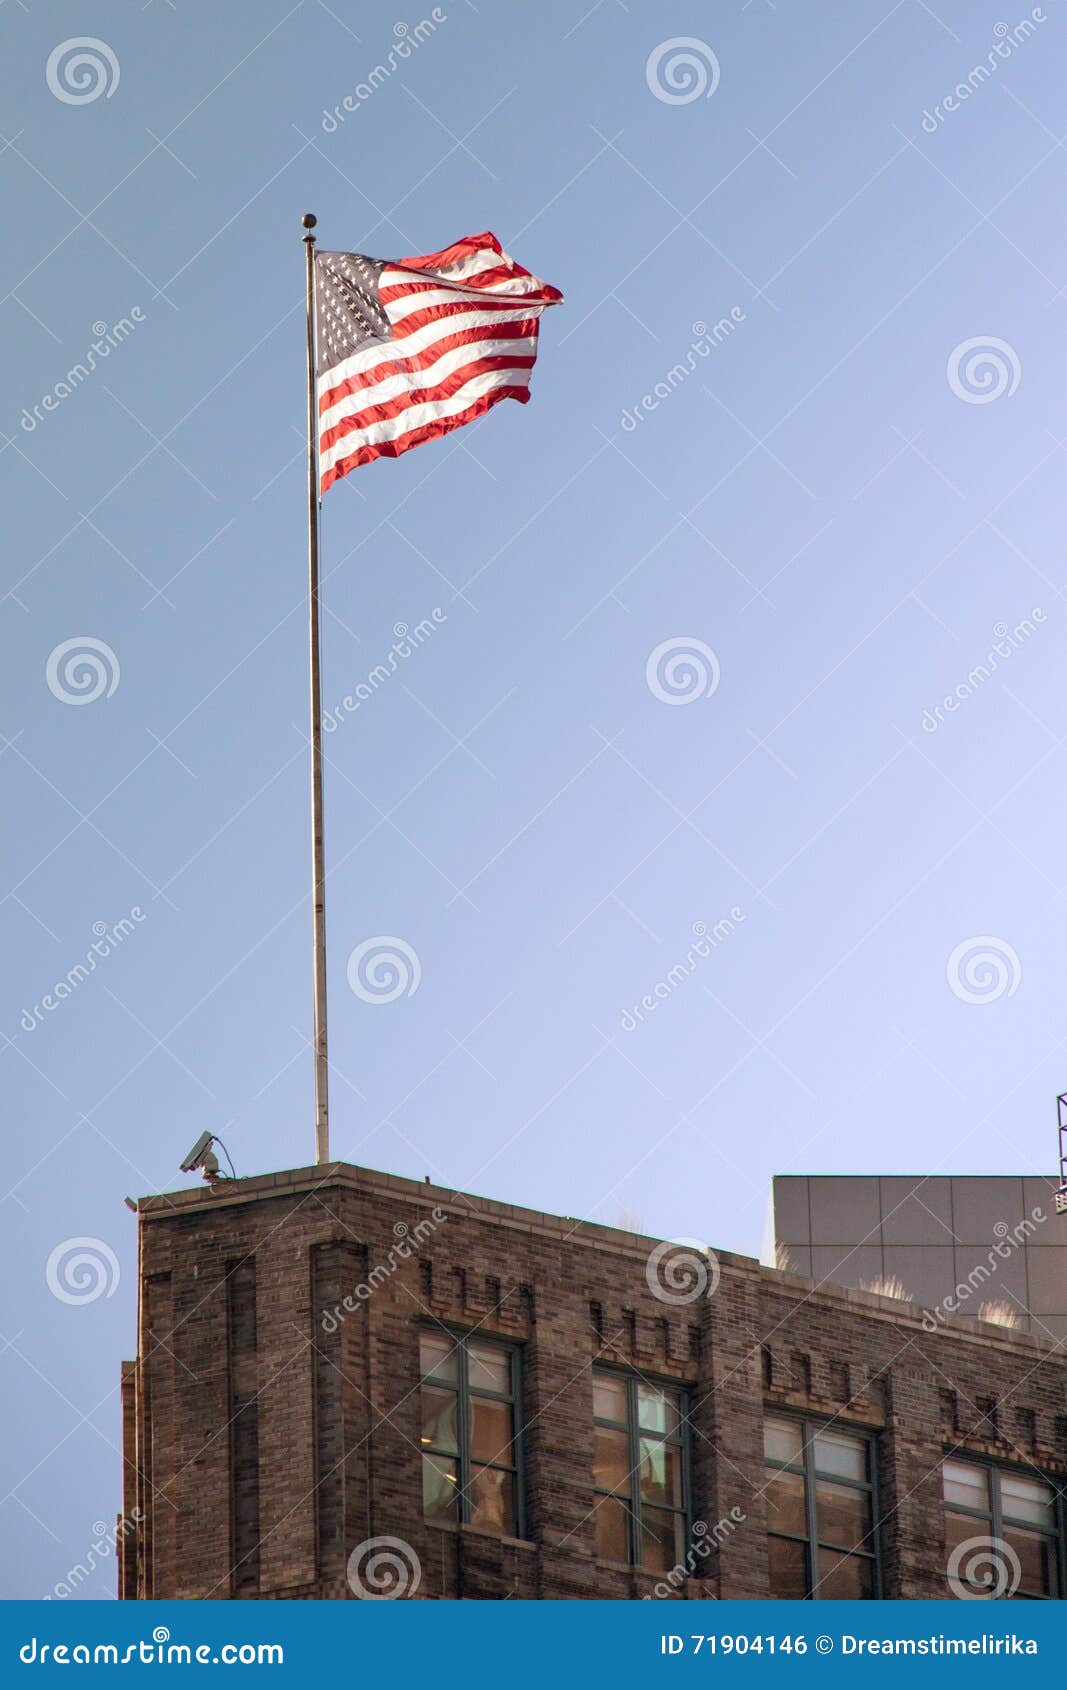 American flag on the house stock photo. Image of celebrations - 71904146